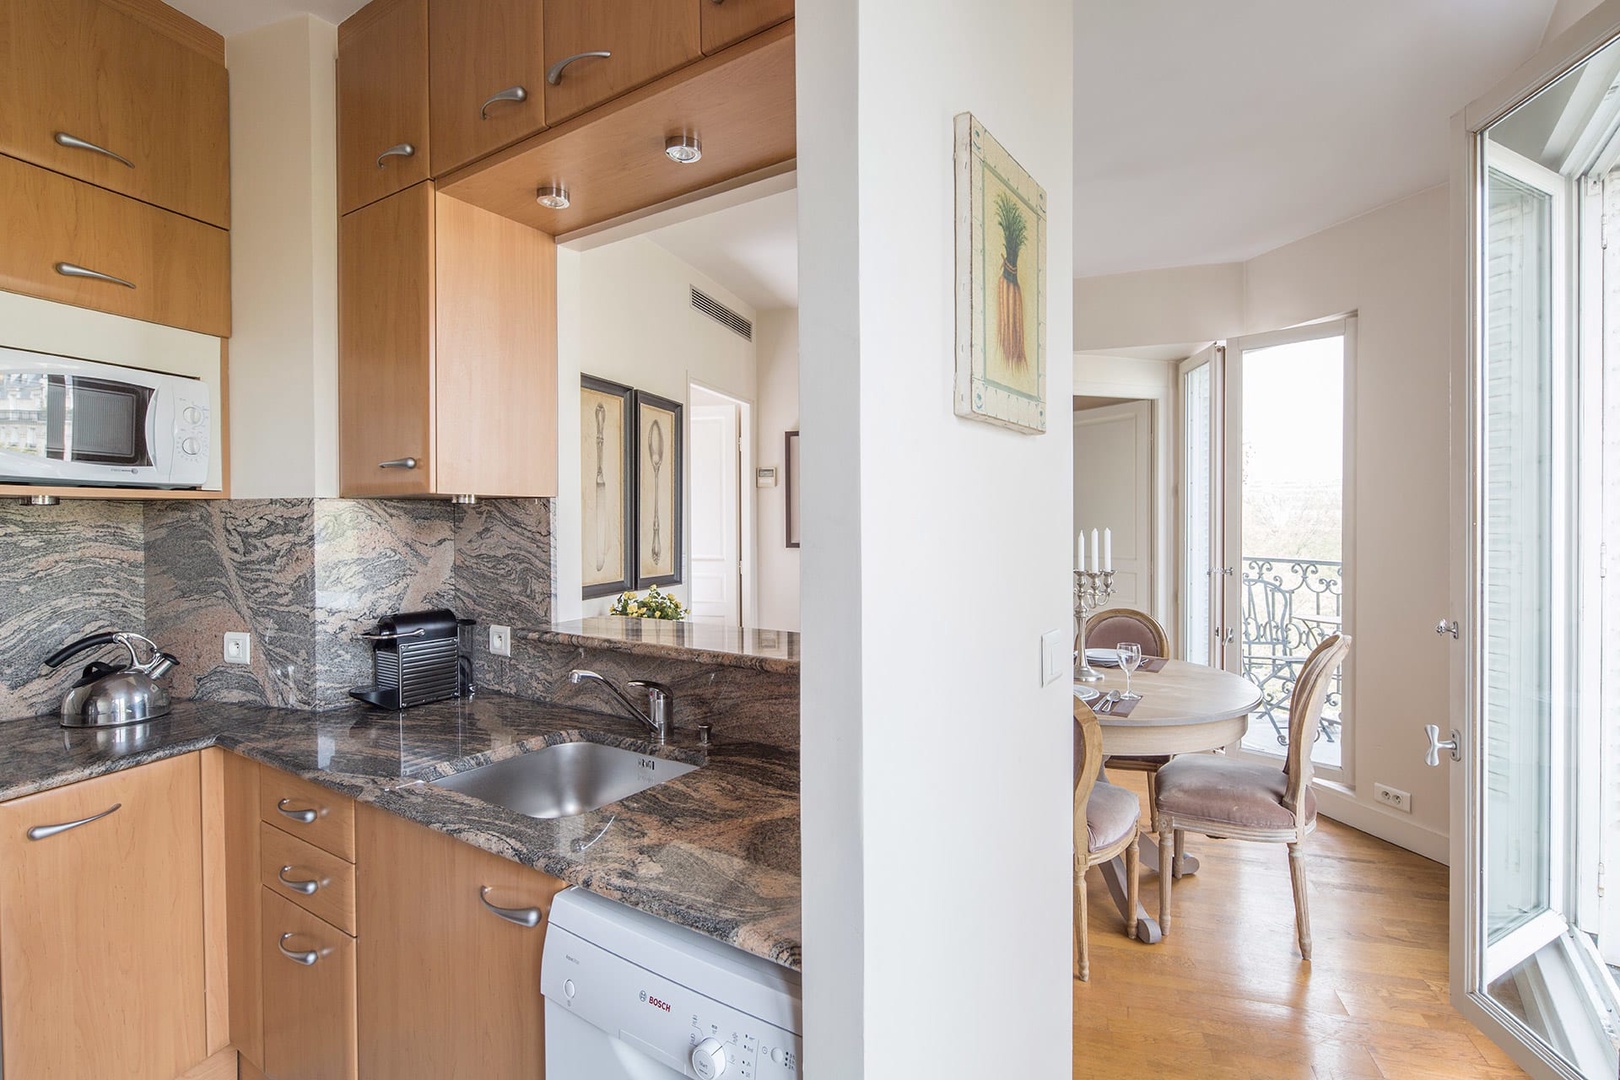 The kitchen is conveniently located next to the dining area, perfect for entertaining.